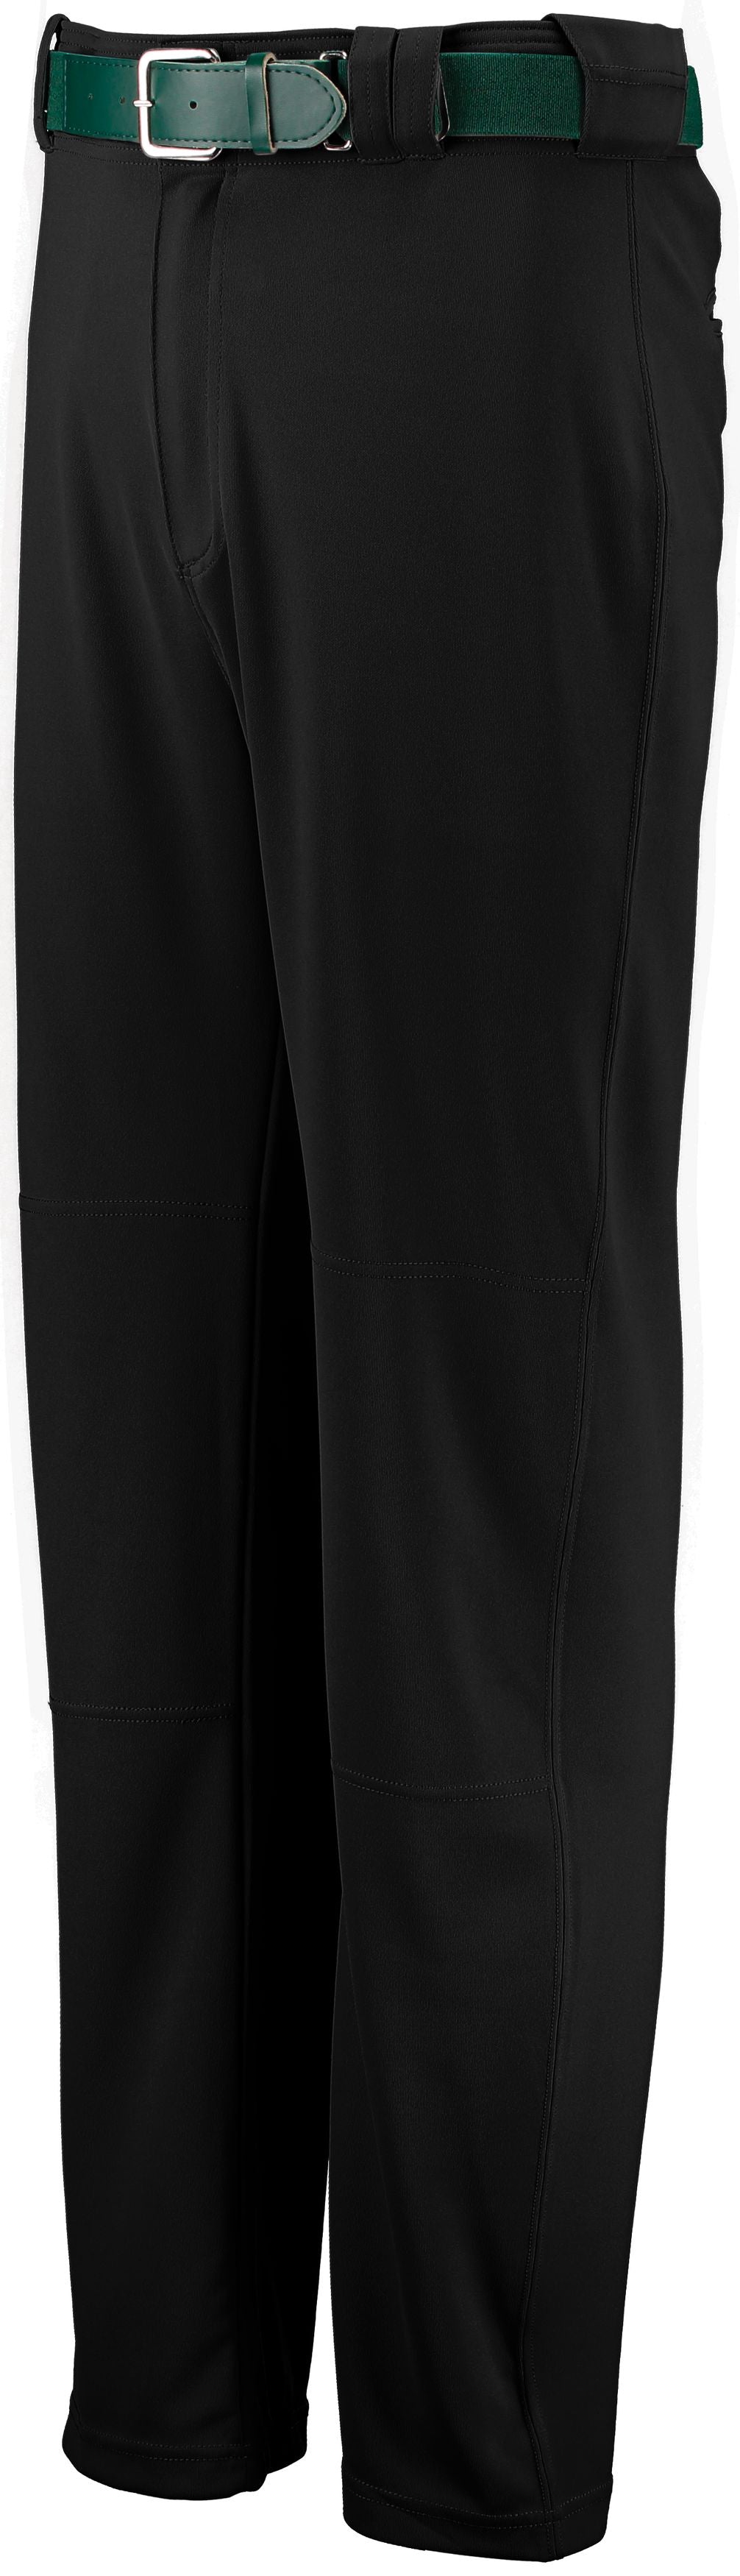 Russell Athletic Boot Cut Game Pant in Black  -Part of the Adult, Adult-Pants, Pants, Baseball, Russell-Athletic-Products, All-Sports, All-Sports-1 product lines at KanaleyCreations.com